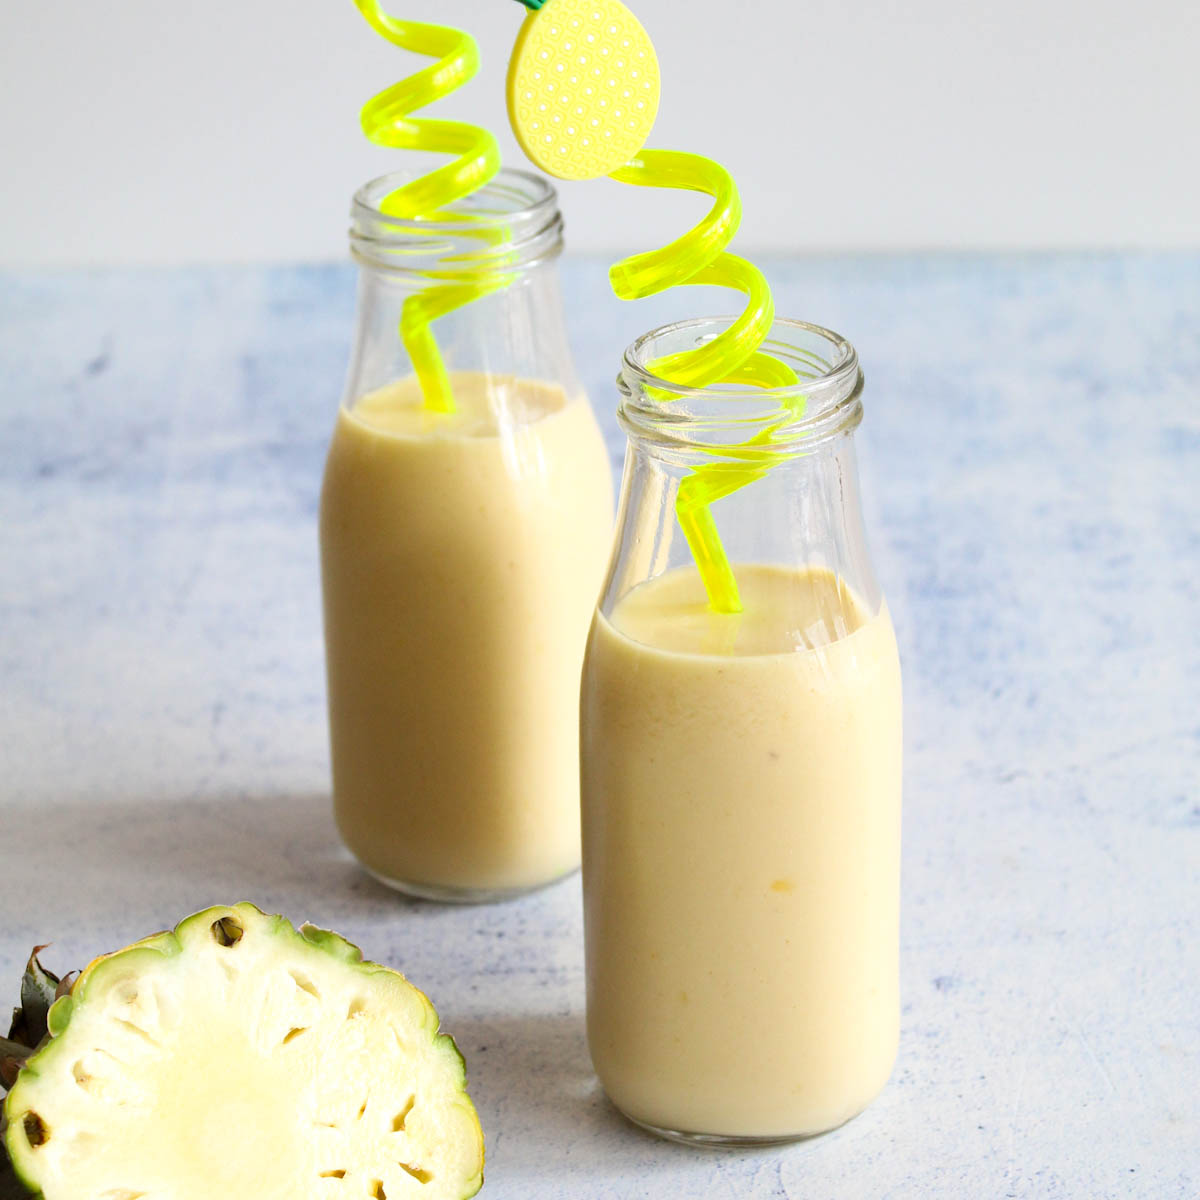 Tropical mango and pineapple smoothie recipe